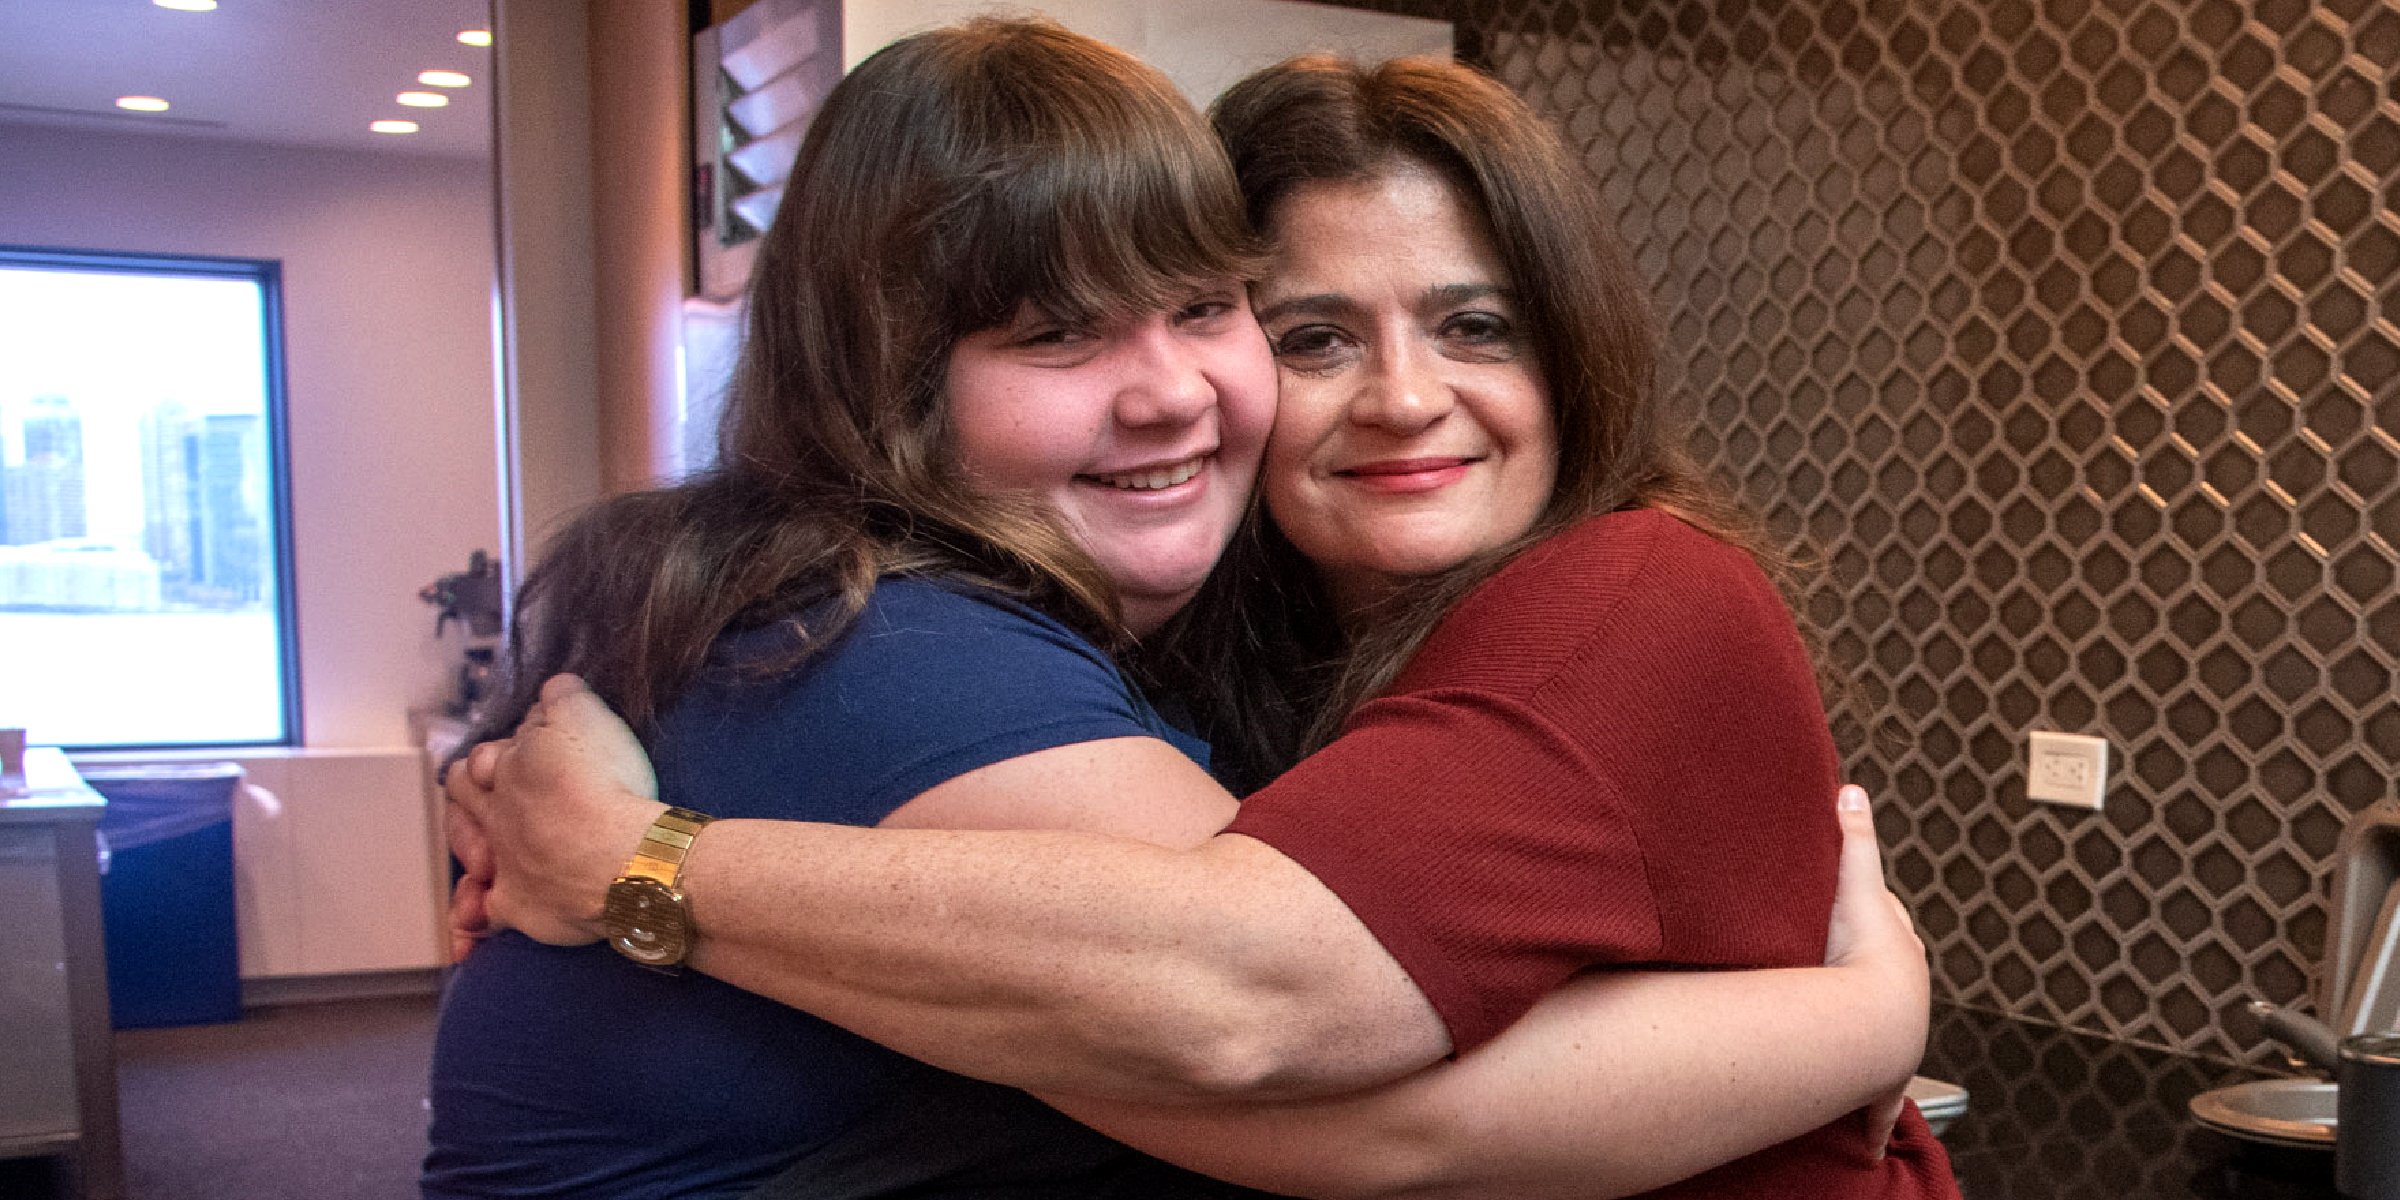 Alex Guarnaschelli and Ava Clark | Source: Getty Images